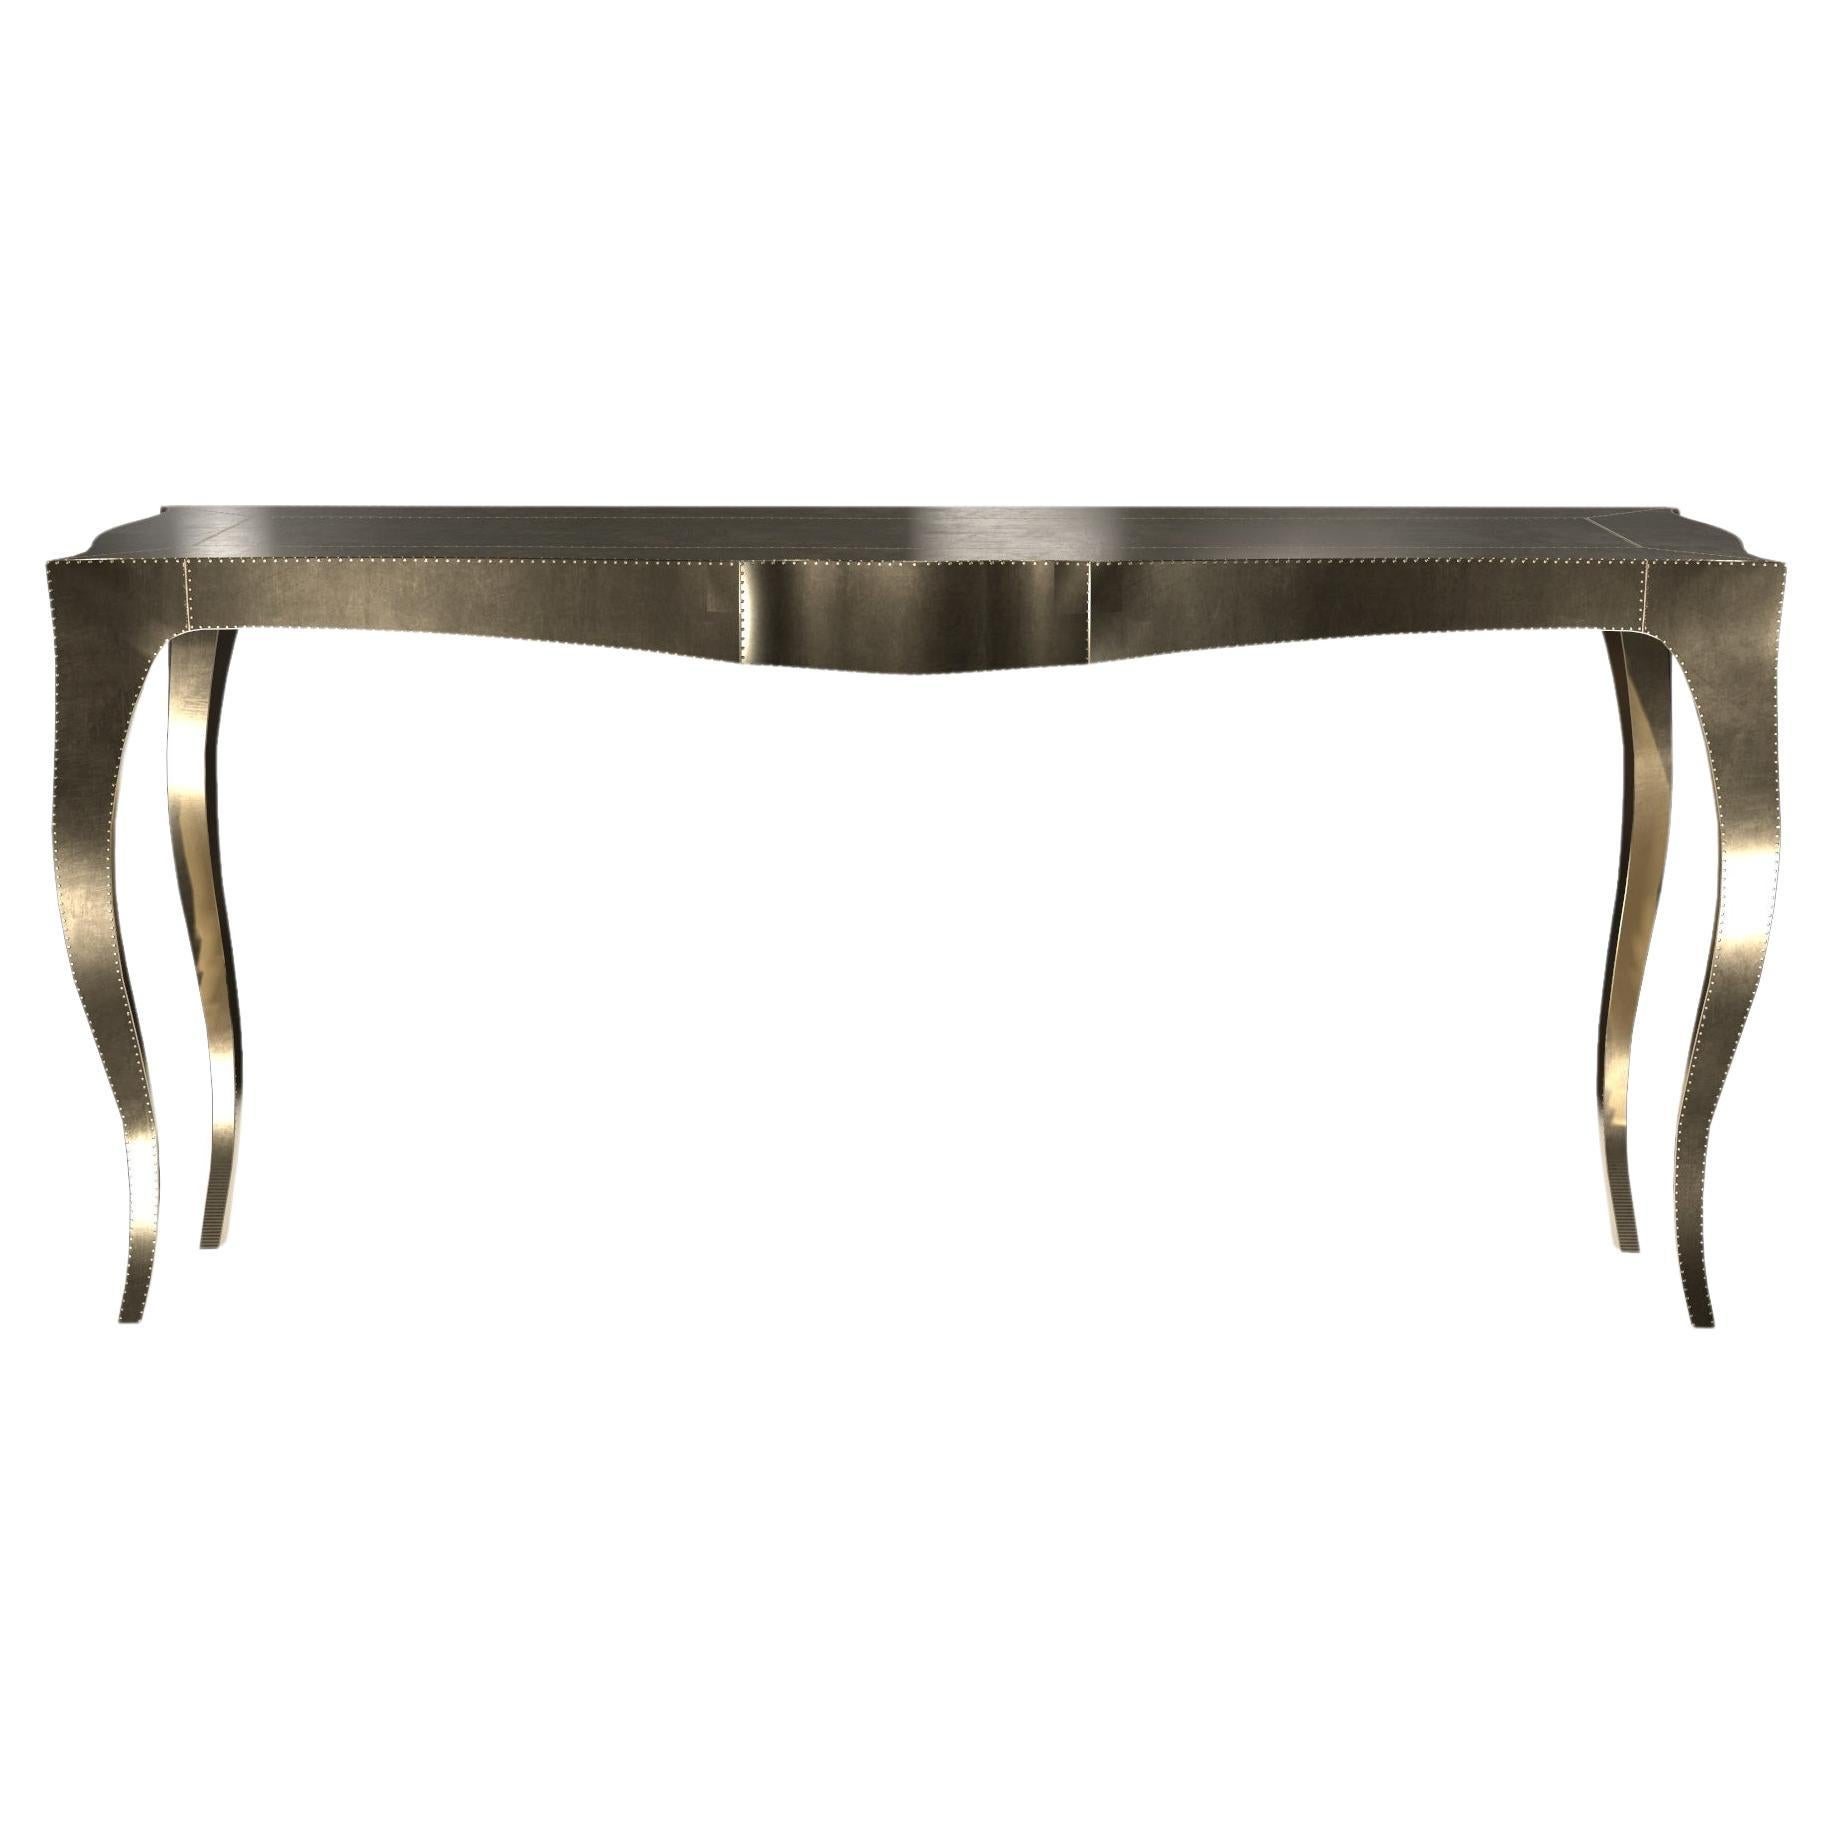 Louise Console Art Deco Nesting Tables and Stacking Tables Smooth Brass 